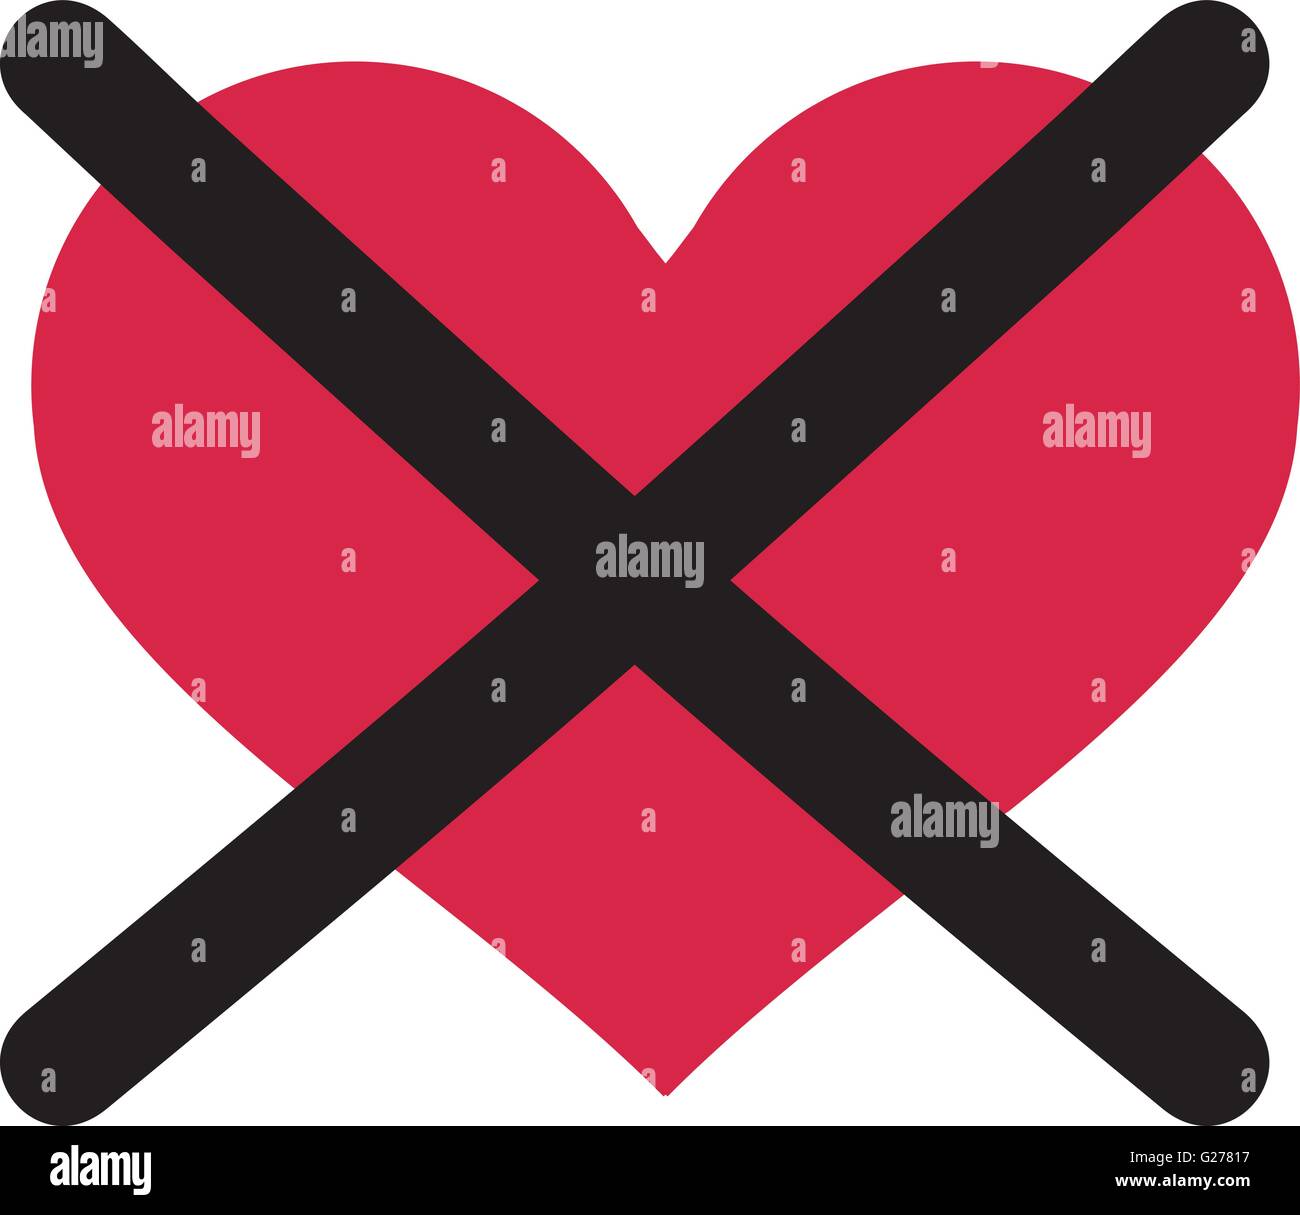 No love - heart crossed out Stock Vector